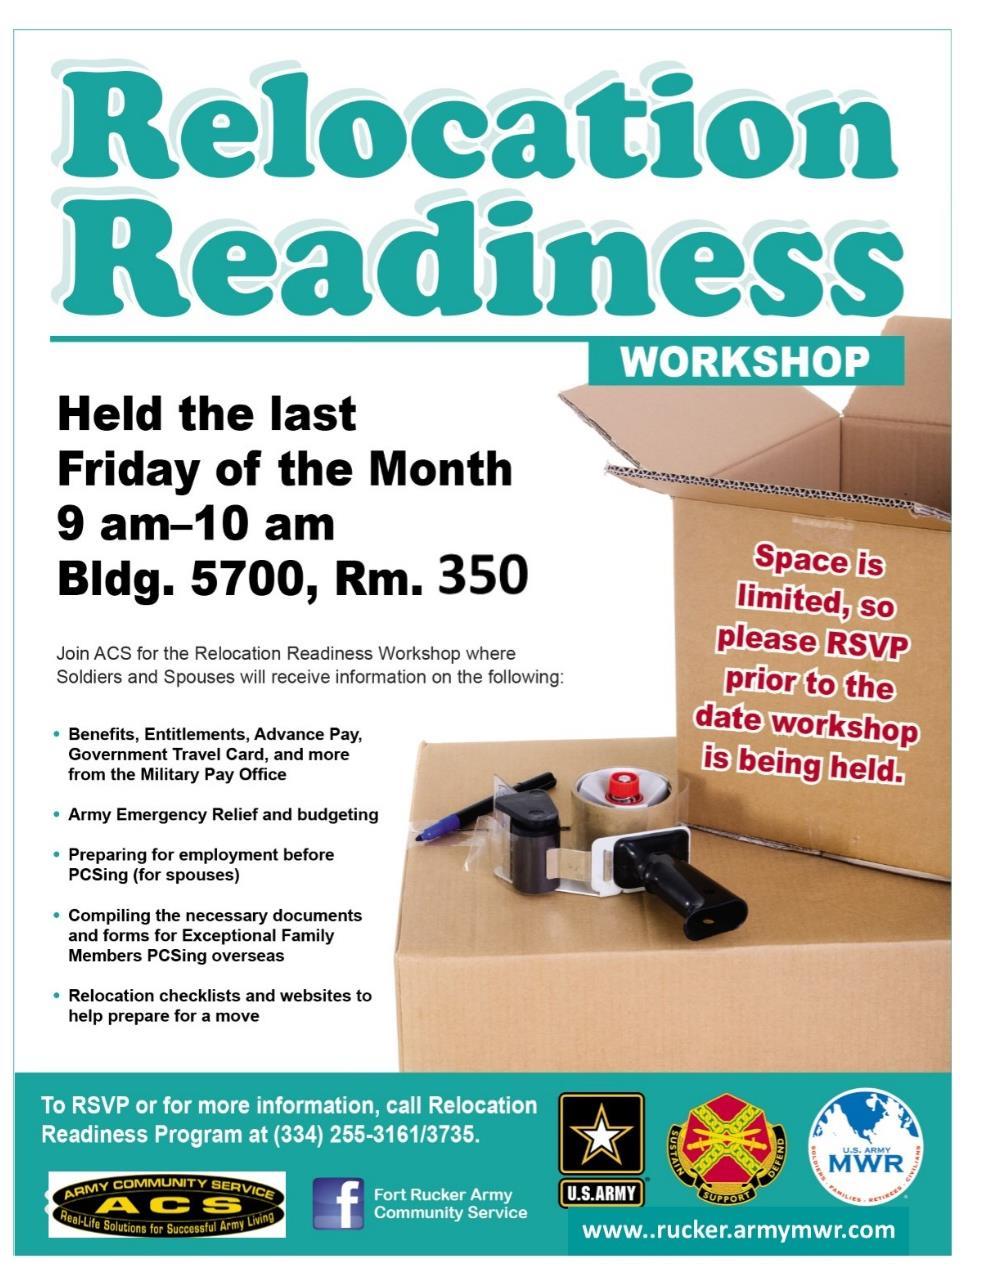 Army Community Service If this is your first move, join us at our Relocation Readiness Workshop.